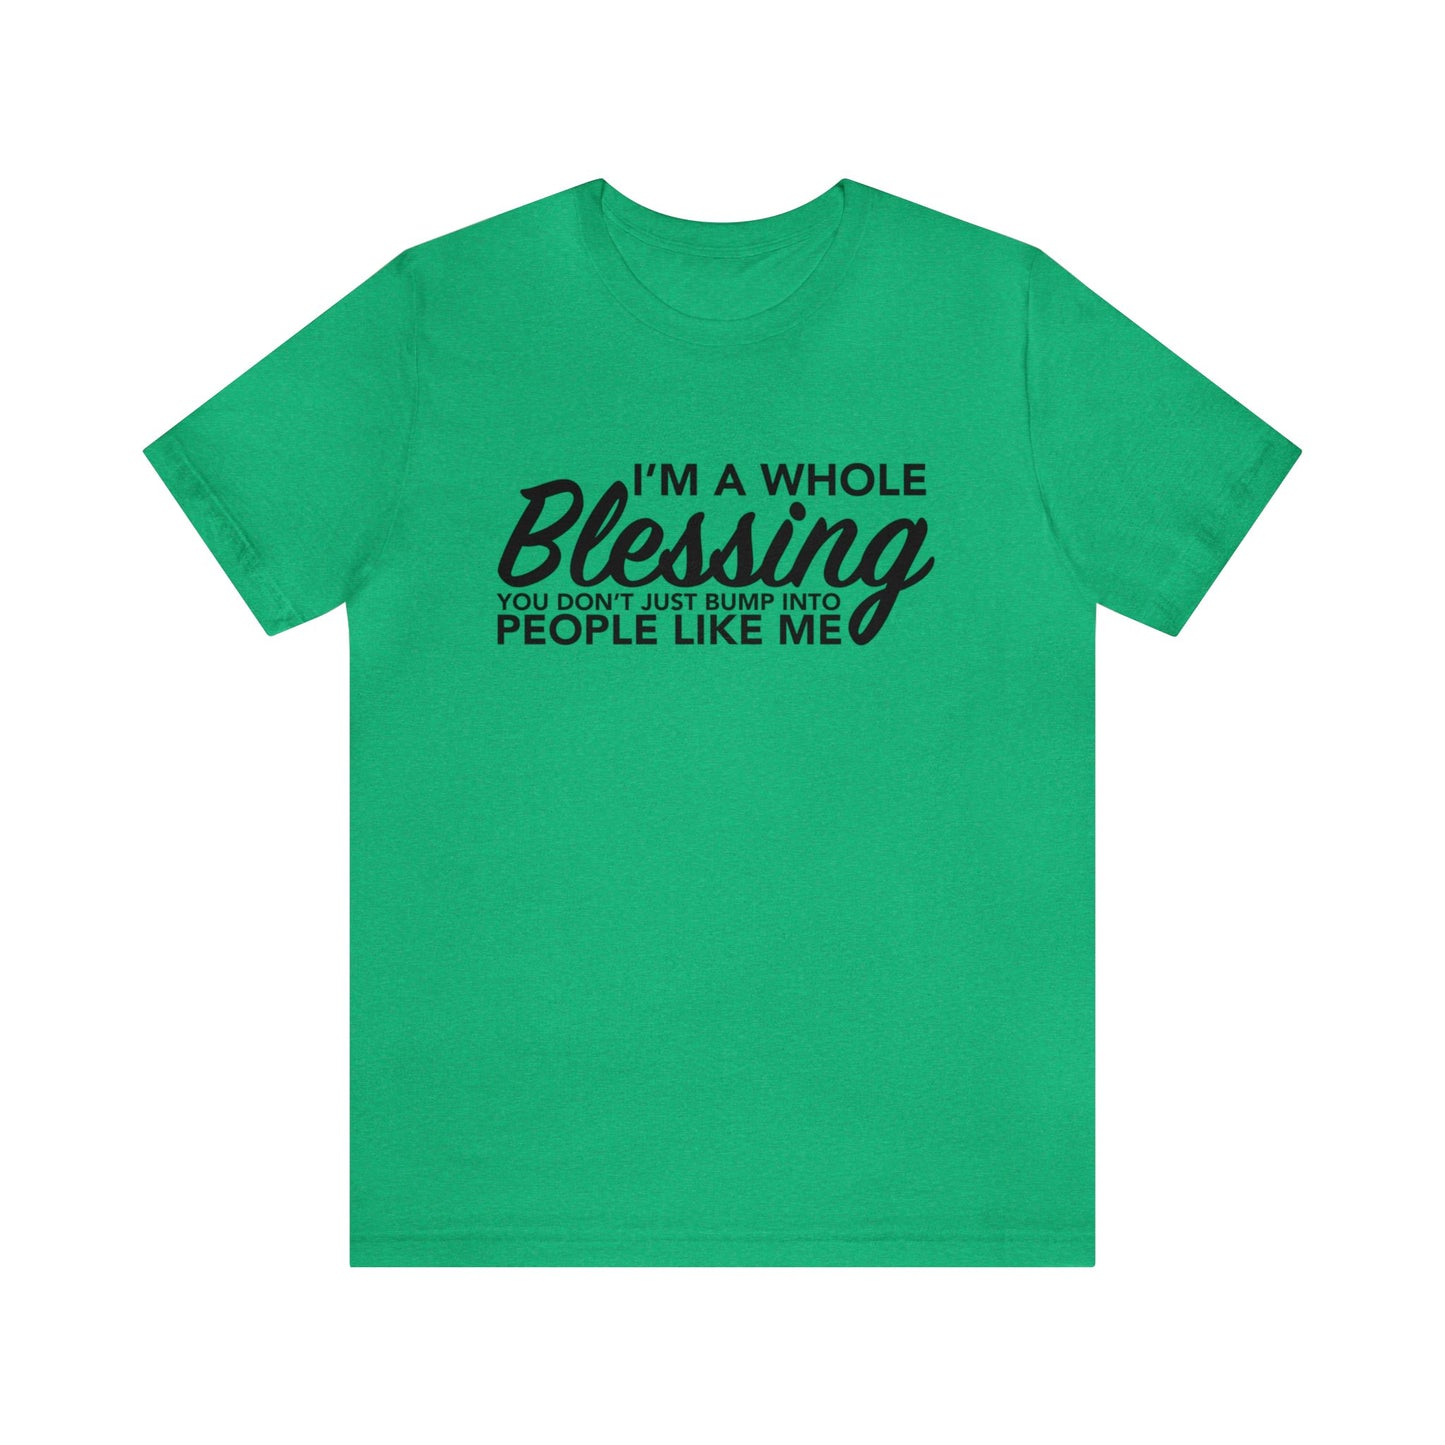 I’m a whole blessing Tee